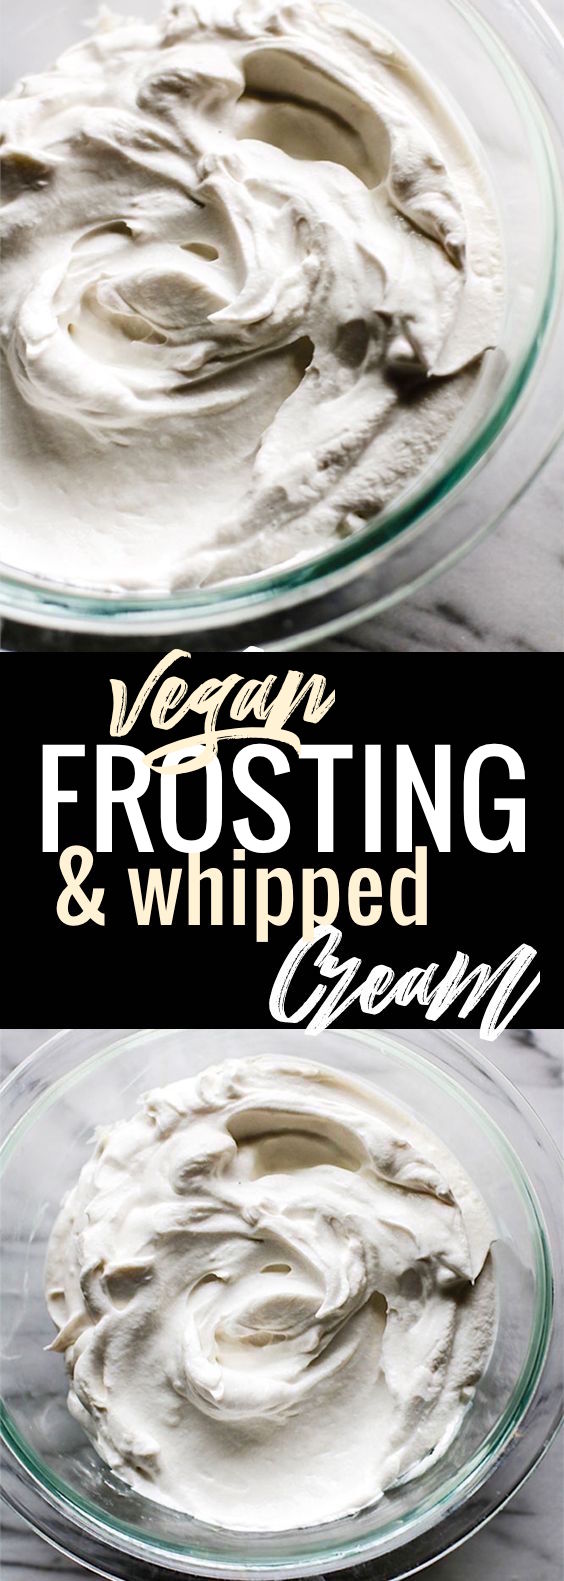 Vegan frosting has never been so easy to make! Making fluffy, gluten-free coconut cream vegan frosting takes 2 ingredients and just one method. This coconut cream vegan frosting is super delicious, healthy, paleo friendly, and EASY! Yes! SIMPLE to make. www.cottercrunch.com